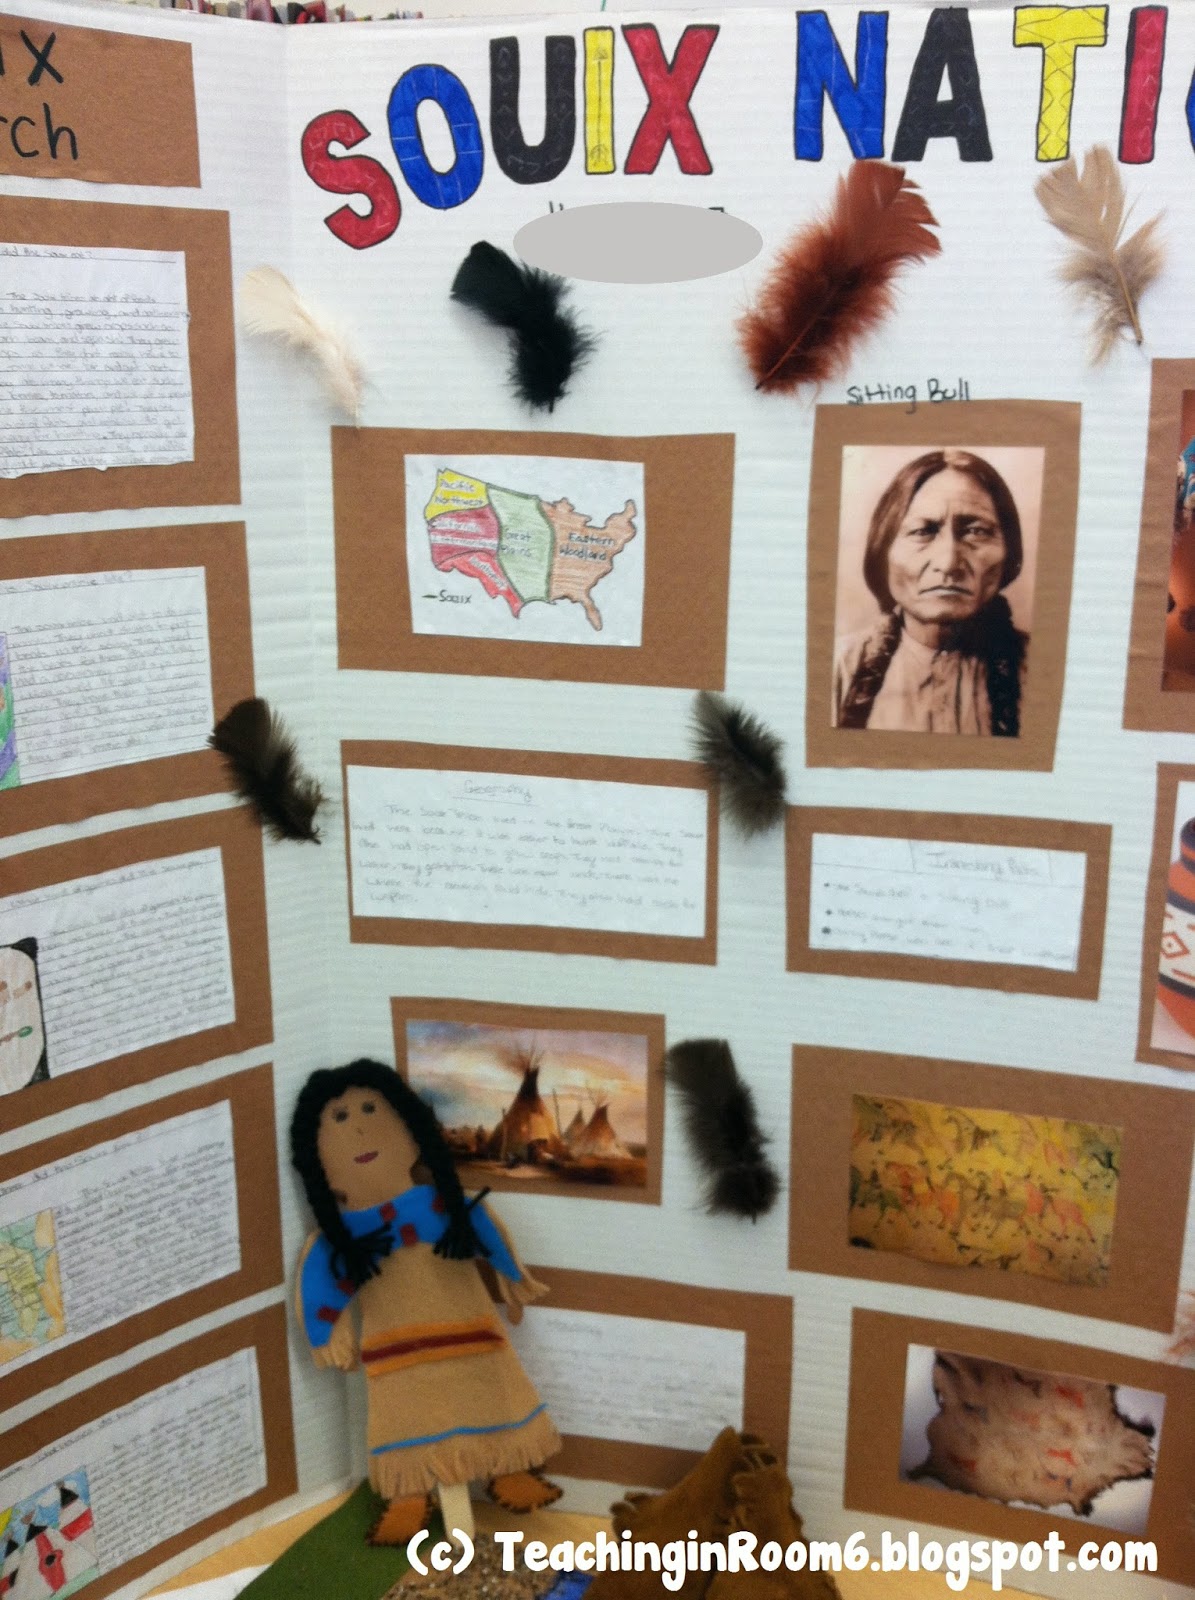 Doing a Native American museum requires the students to do research, make crafts, create clothing, build a home, and generally learn a LOT about the Pre-Columbian Native Americans living in the area.